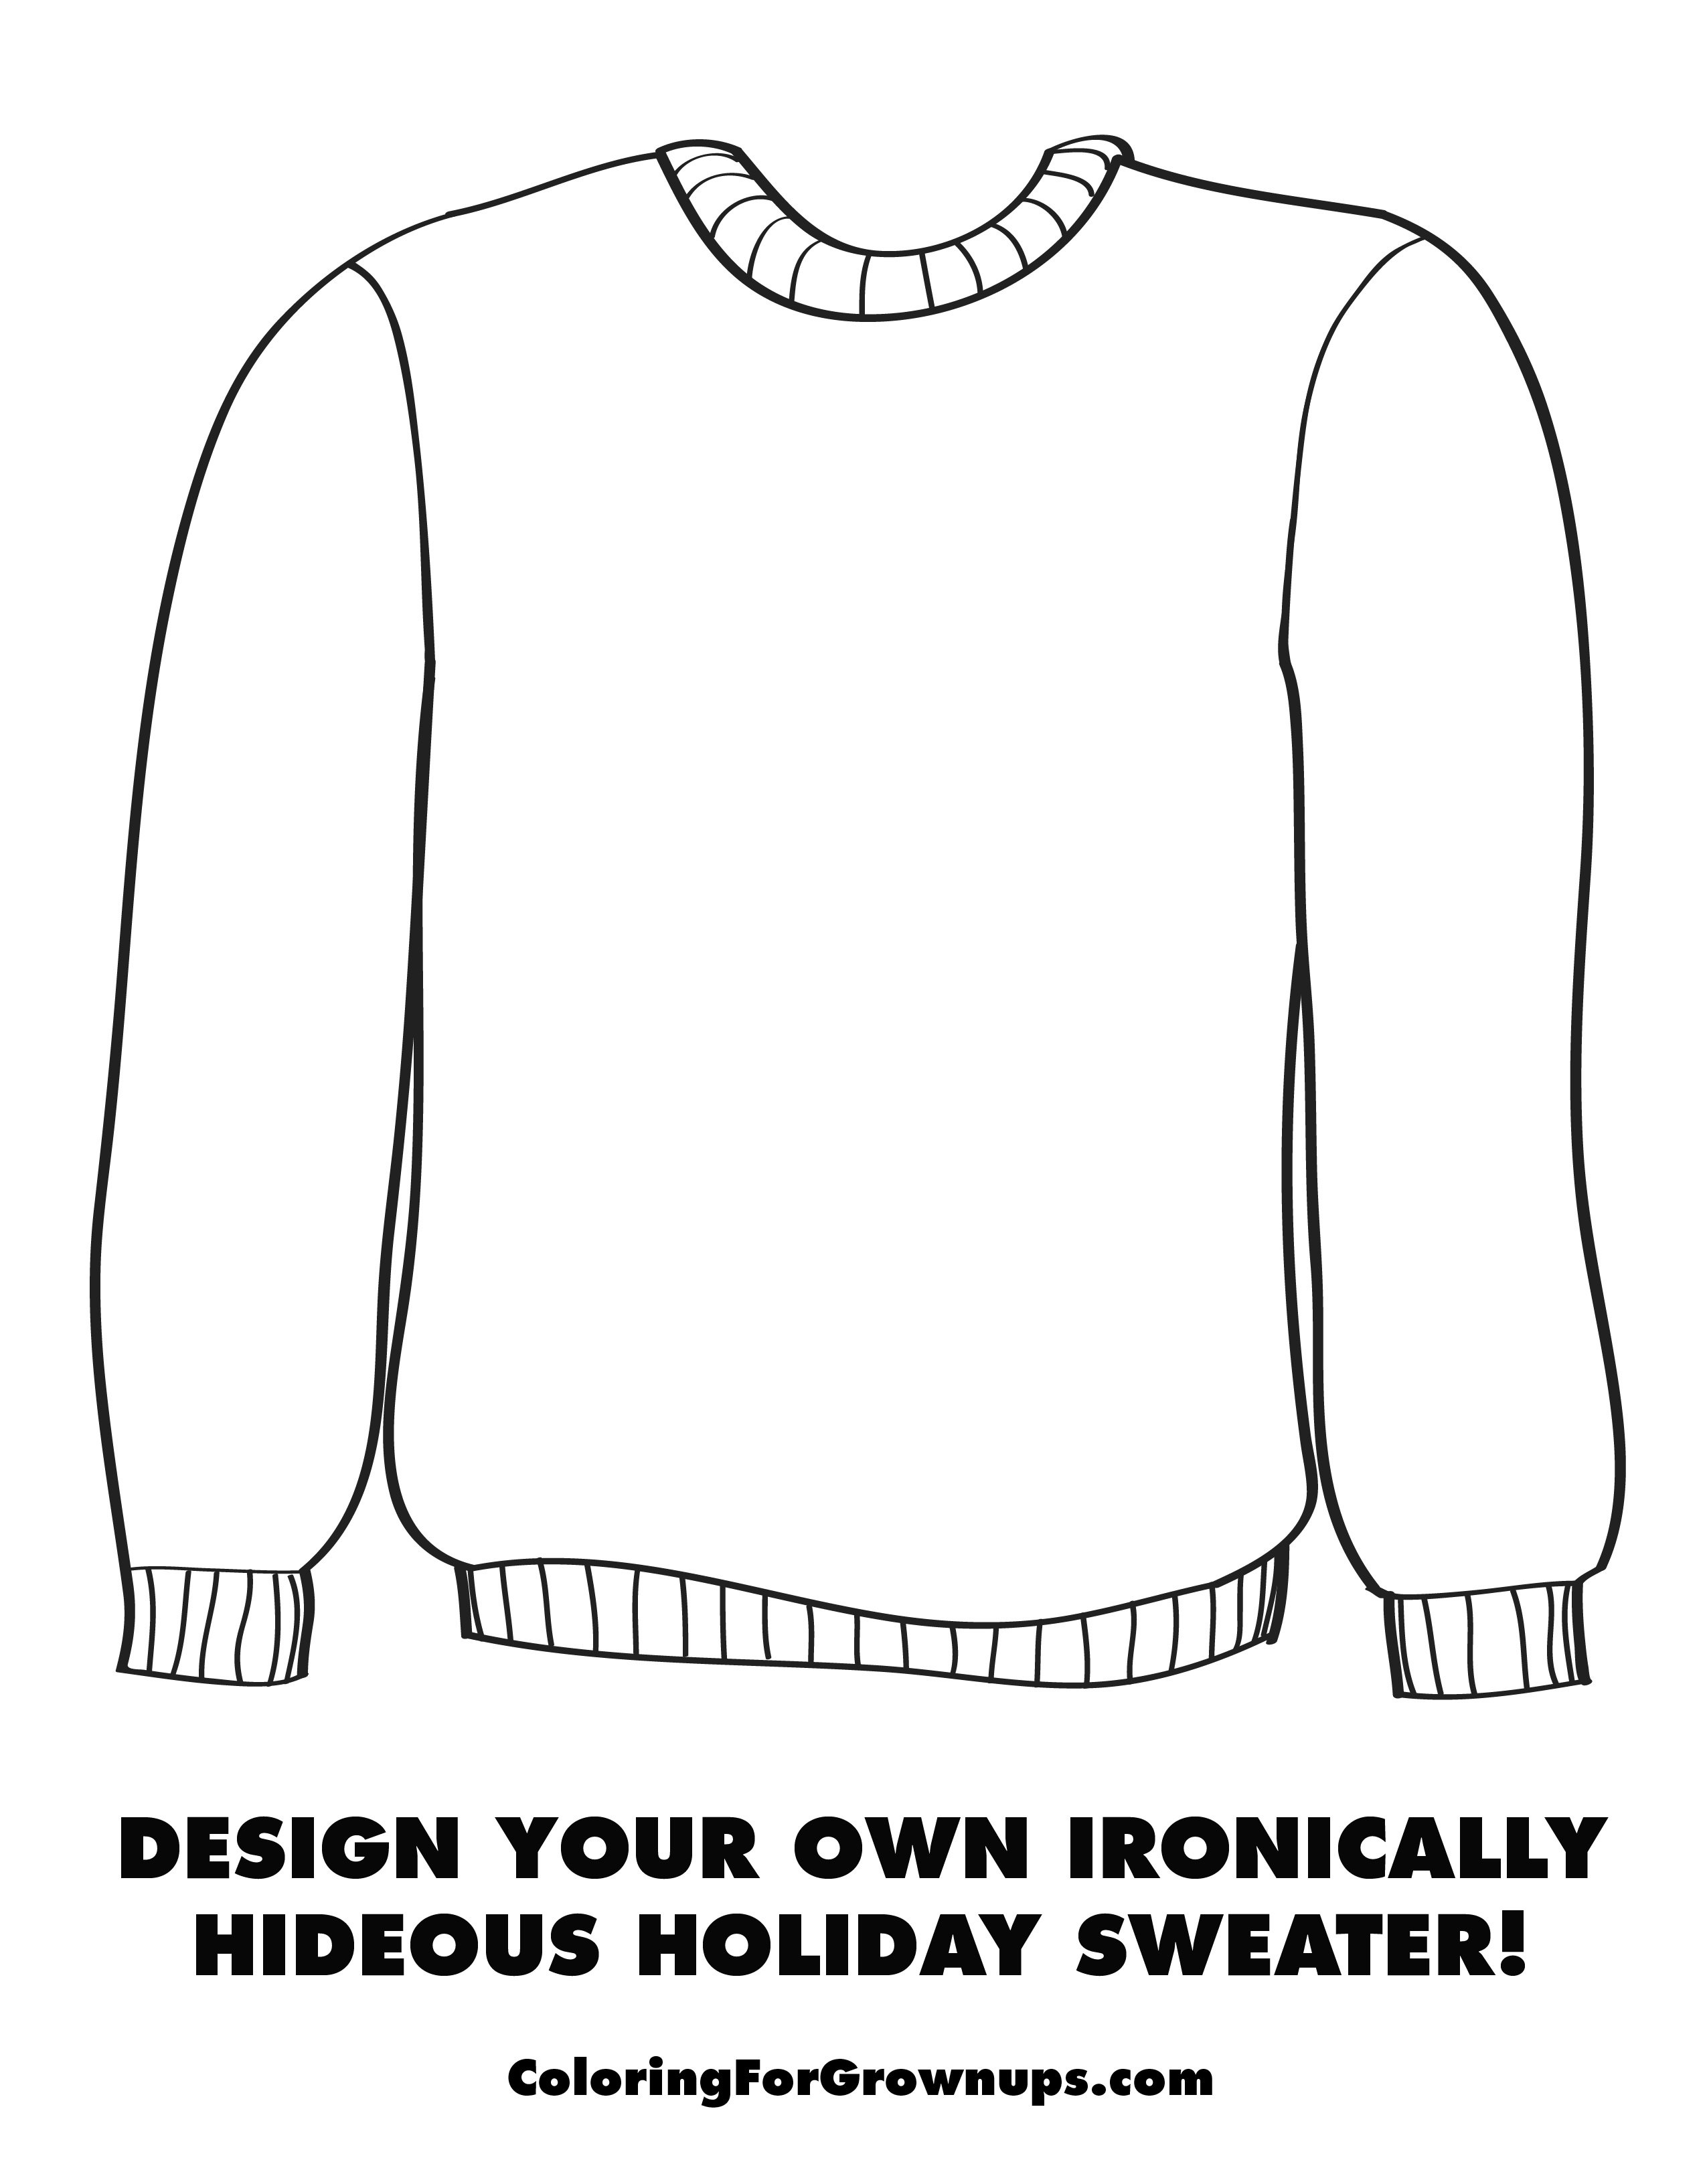 14 Best Images of Design Your Own Sweater Worksheet Design Your Own